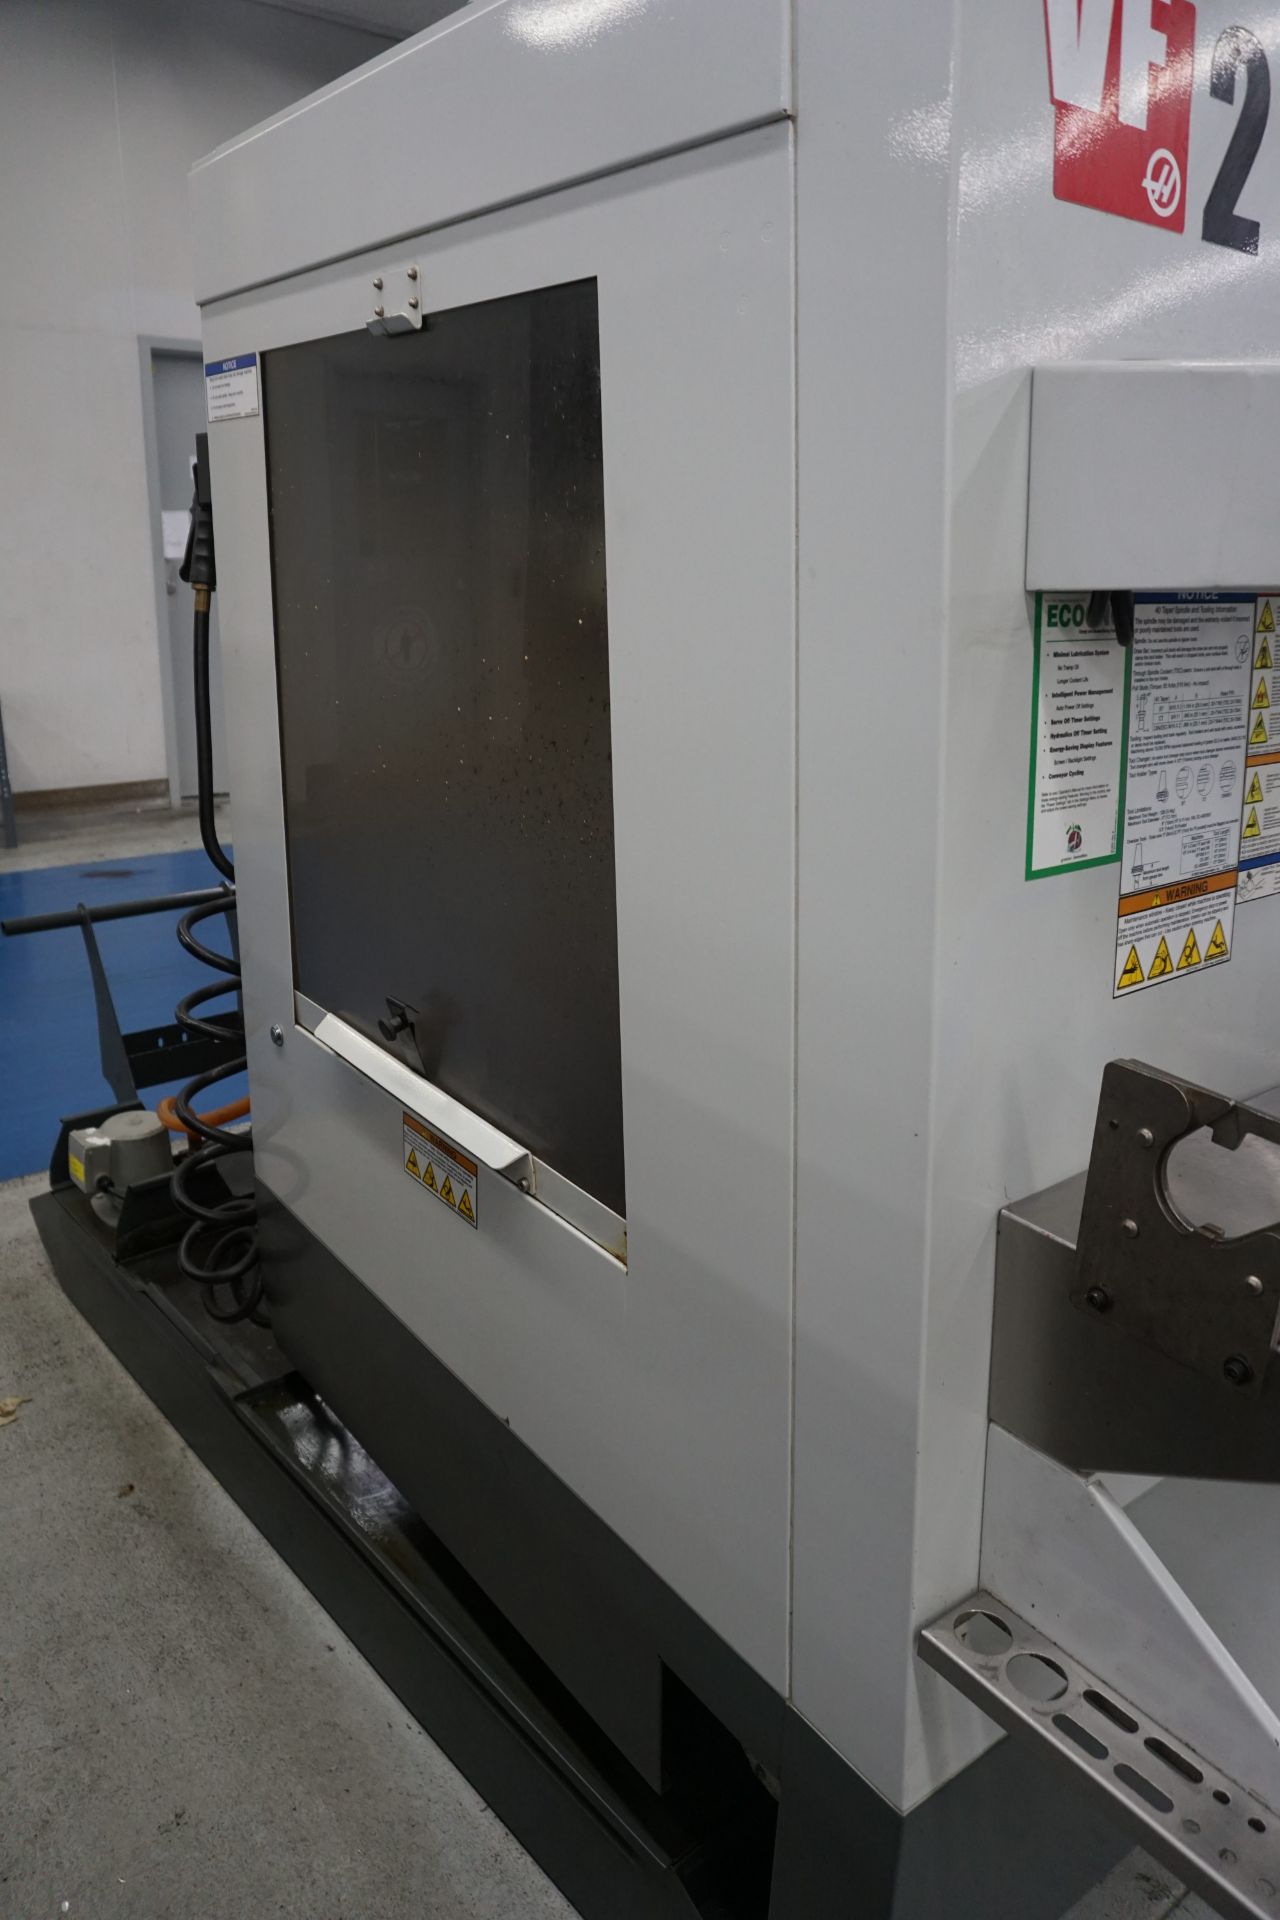 2010 HAAS VF2 CNC VERTICAL MACHINING CENTER - Image 18 of 18